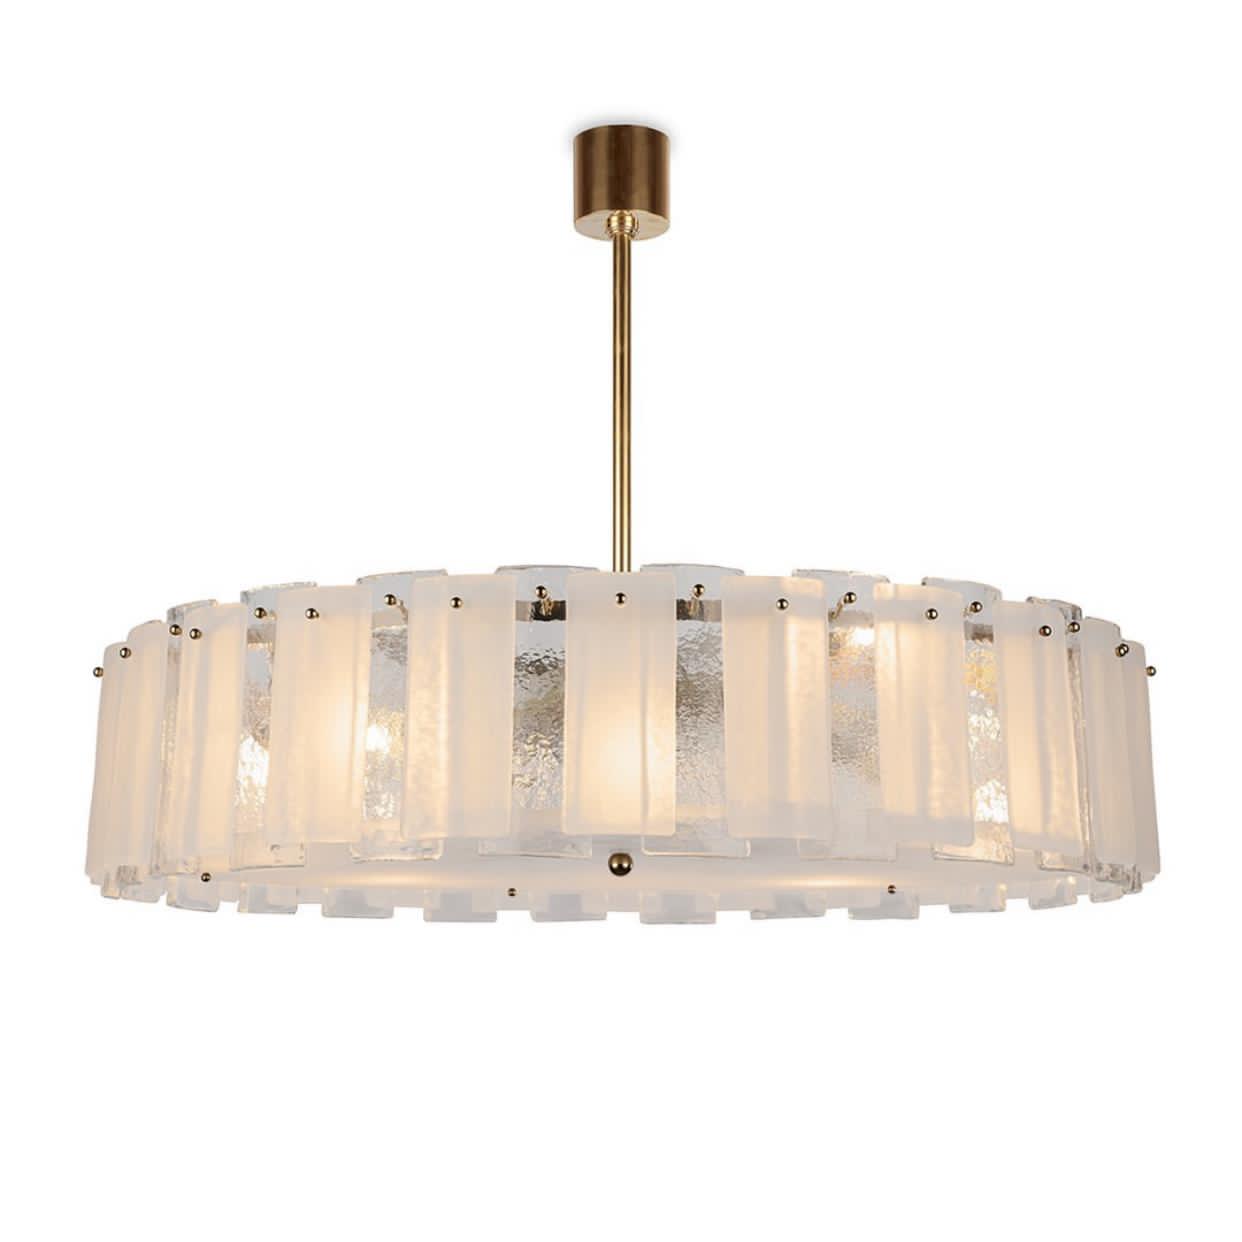 Harmony Modern Luxury Glacier Glass Round Chandelier For Living Room